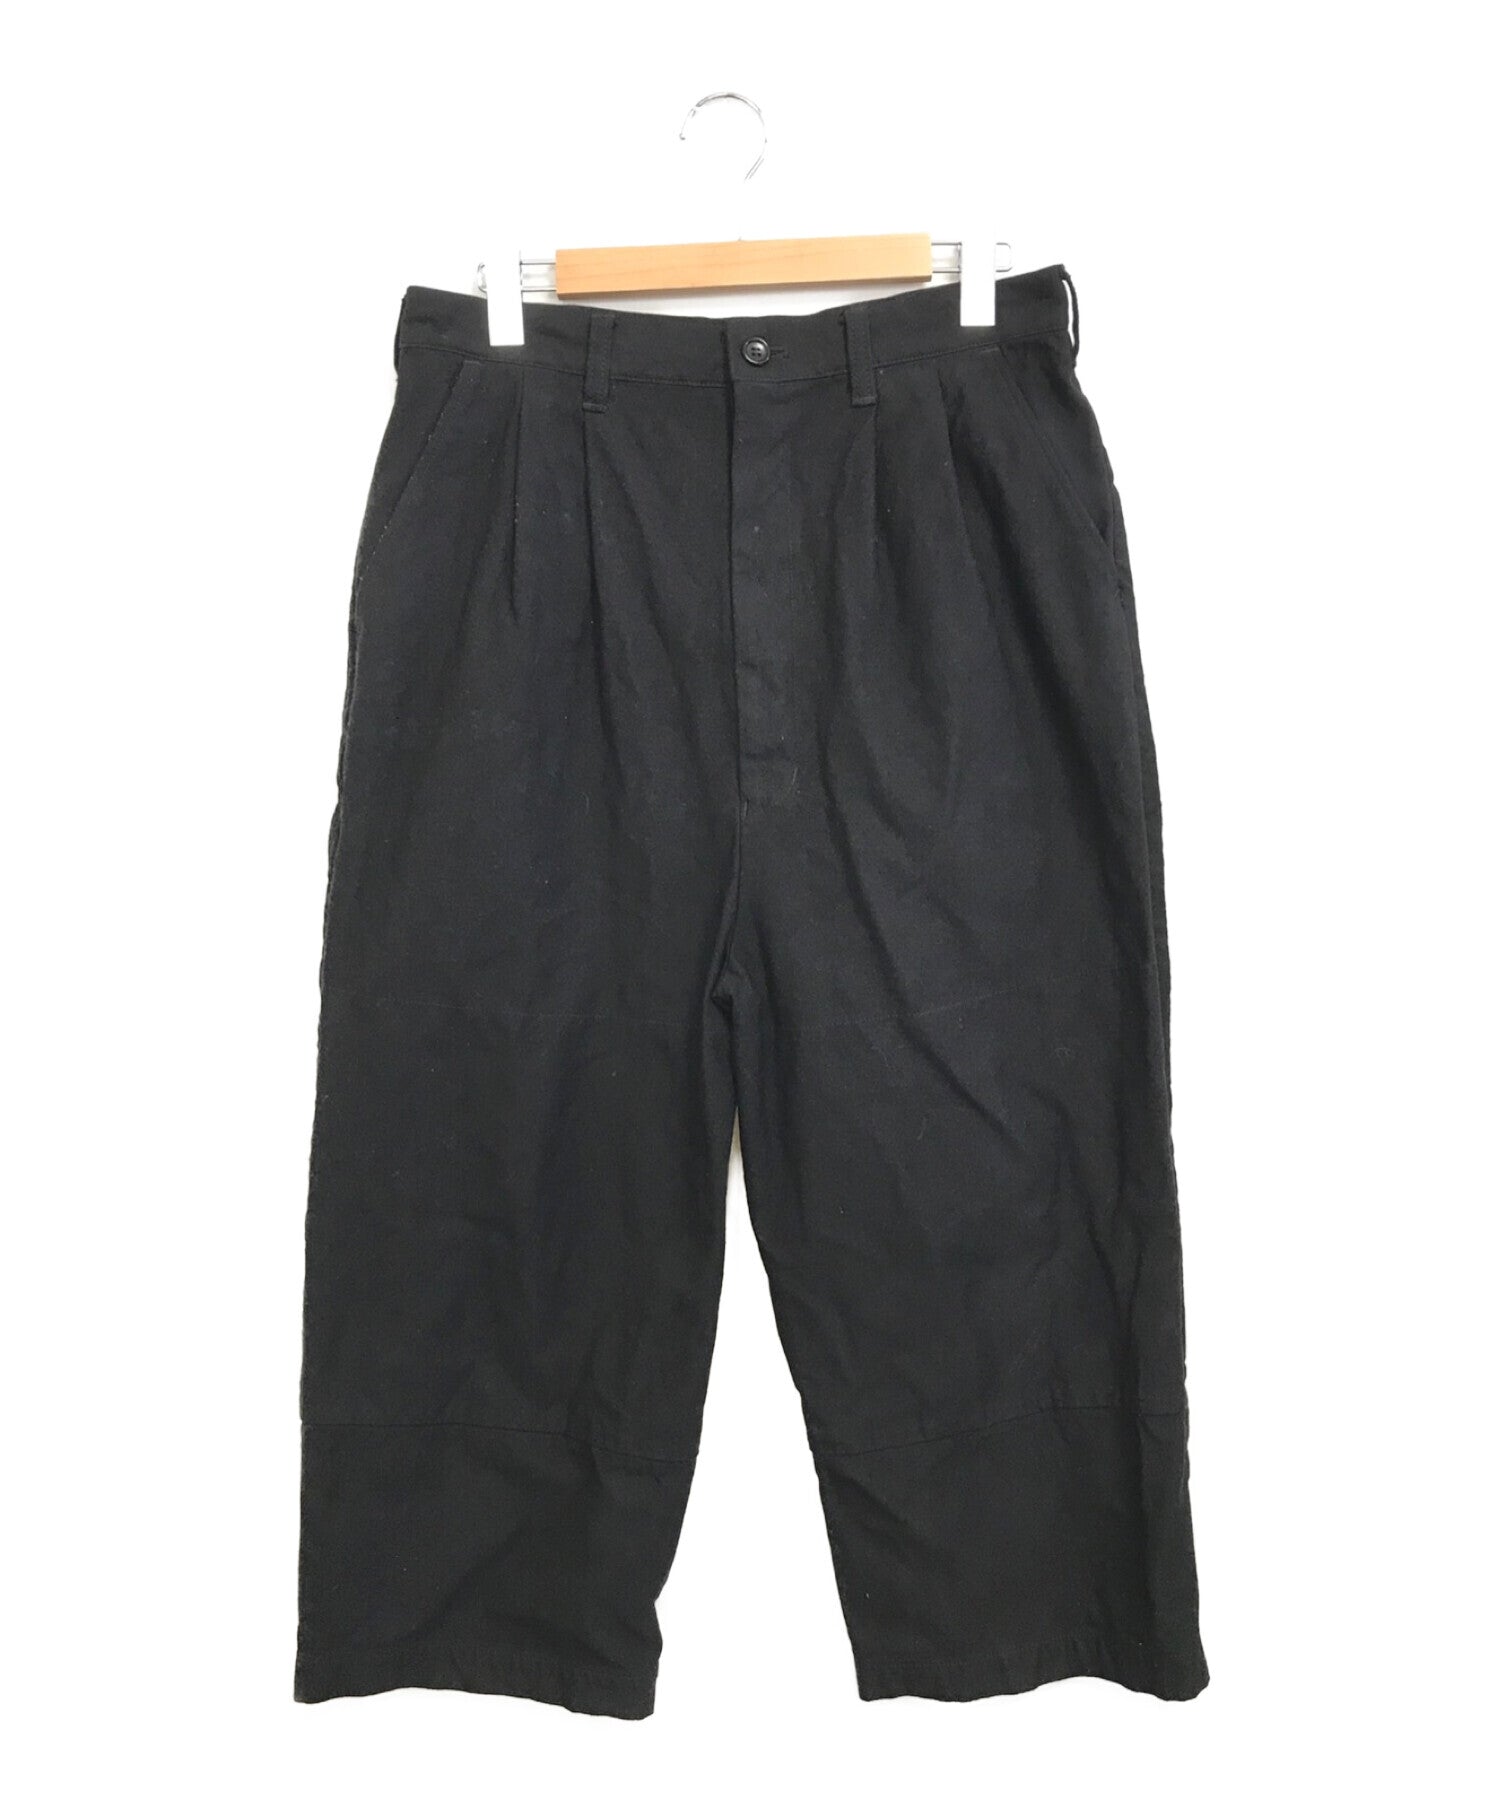 COMME des GARCONS HOMME pants with a different material